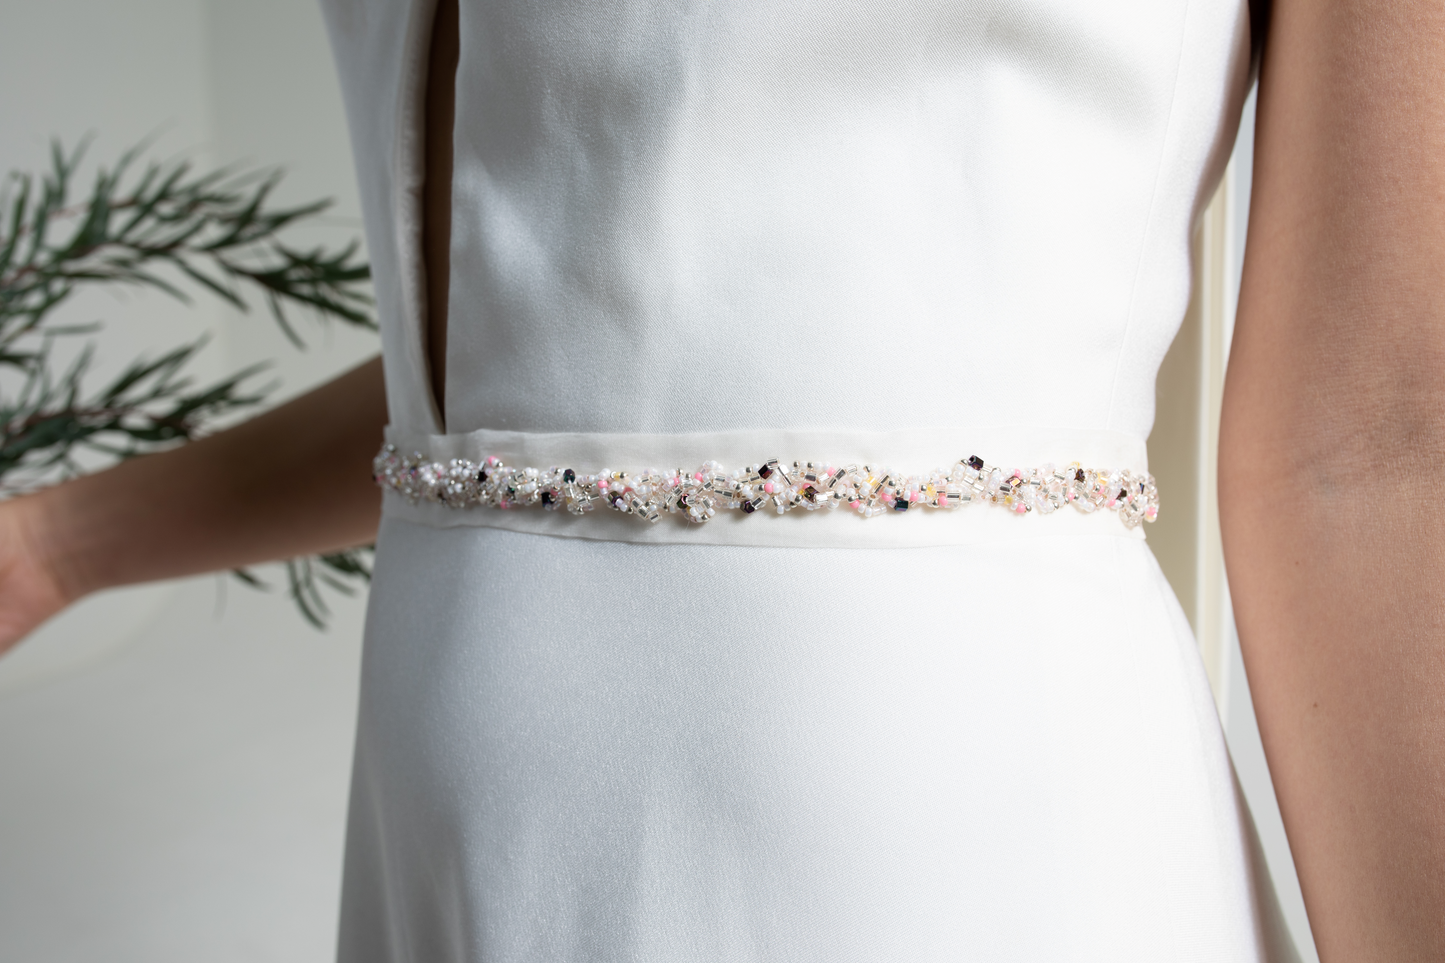 hand-crafted, embroidered bridal belts and sashes-Claude Bridal Studio